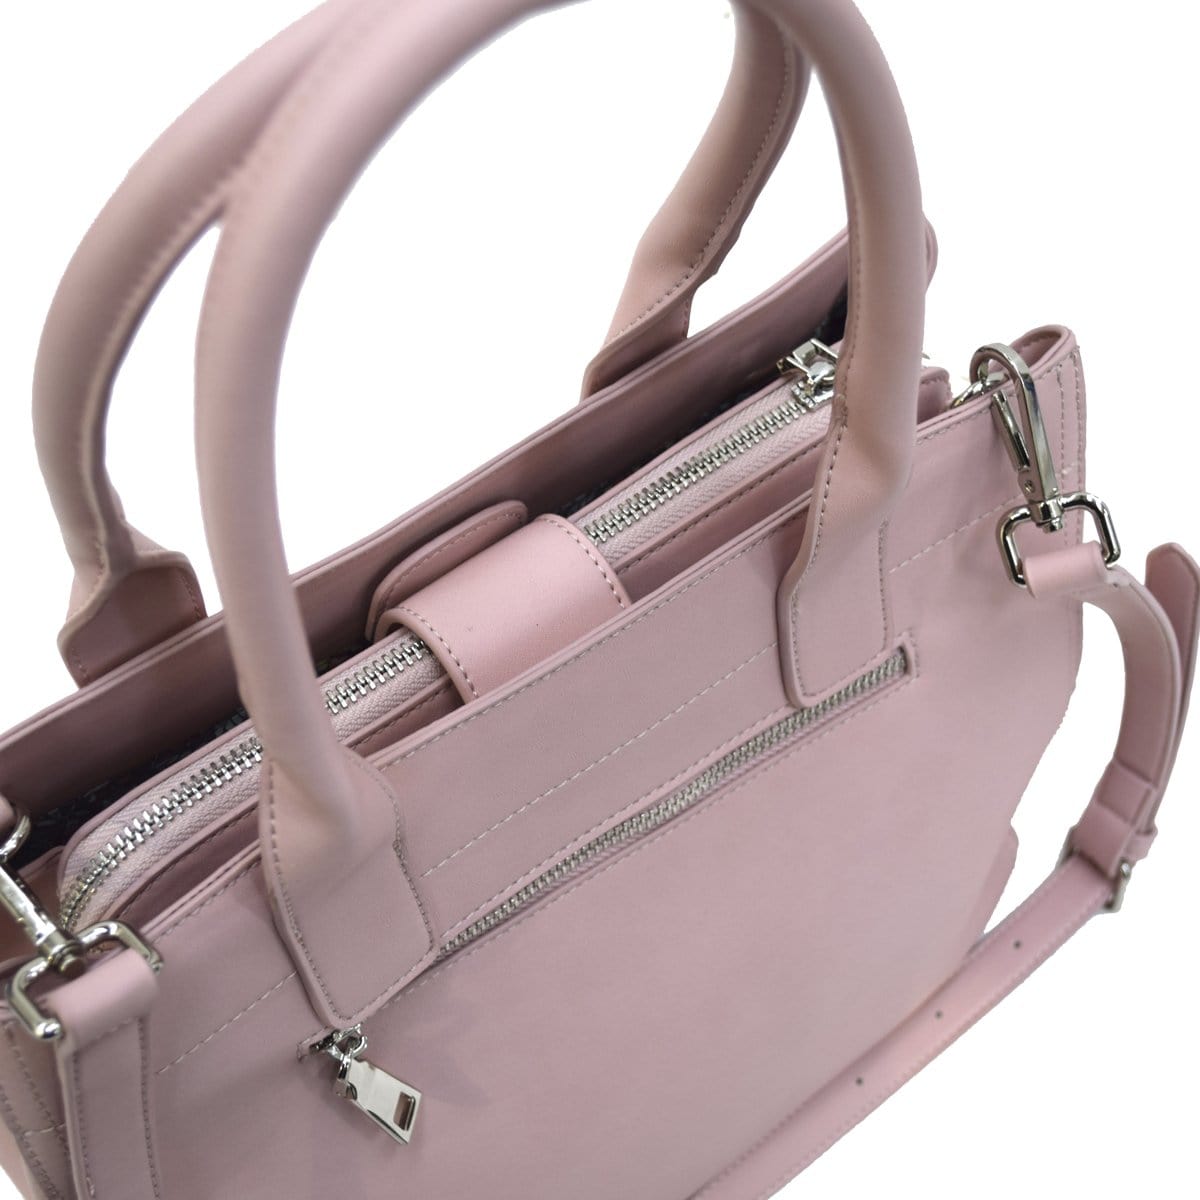 Monroe Tote - Dusty Pink Leather Look - 30% off